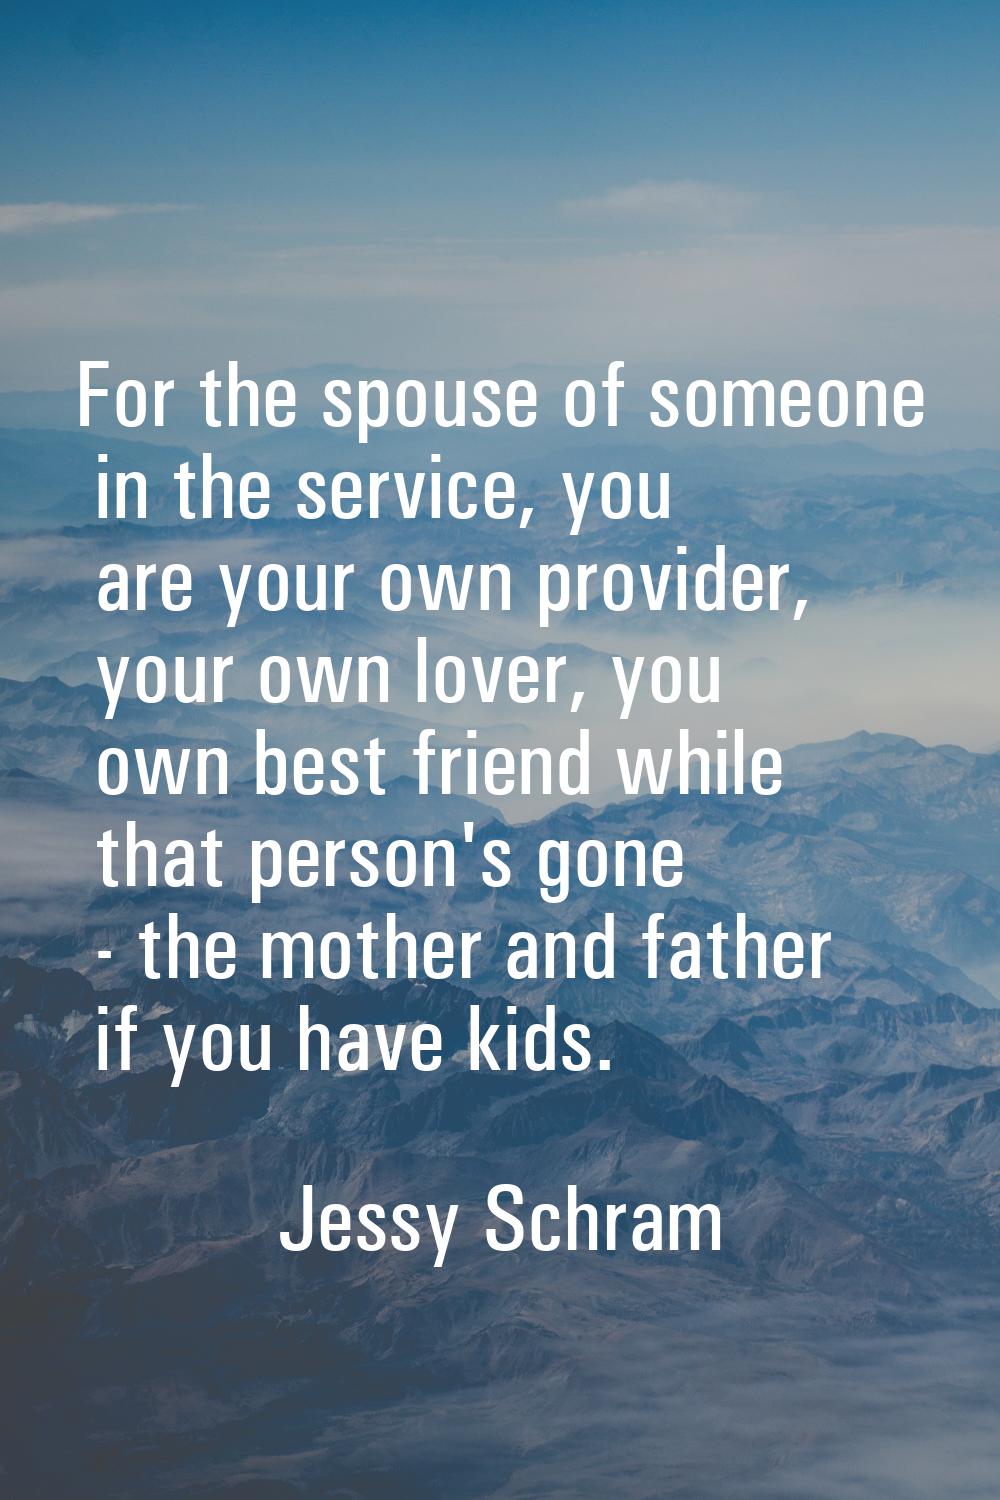 For the spouse of someone in the service, you are your own provider, your own lover, you own best f